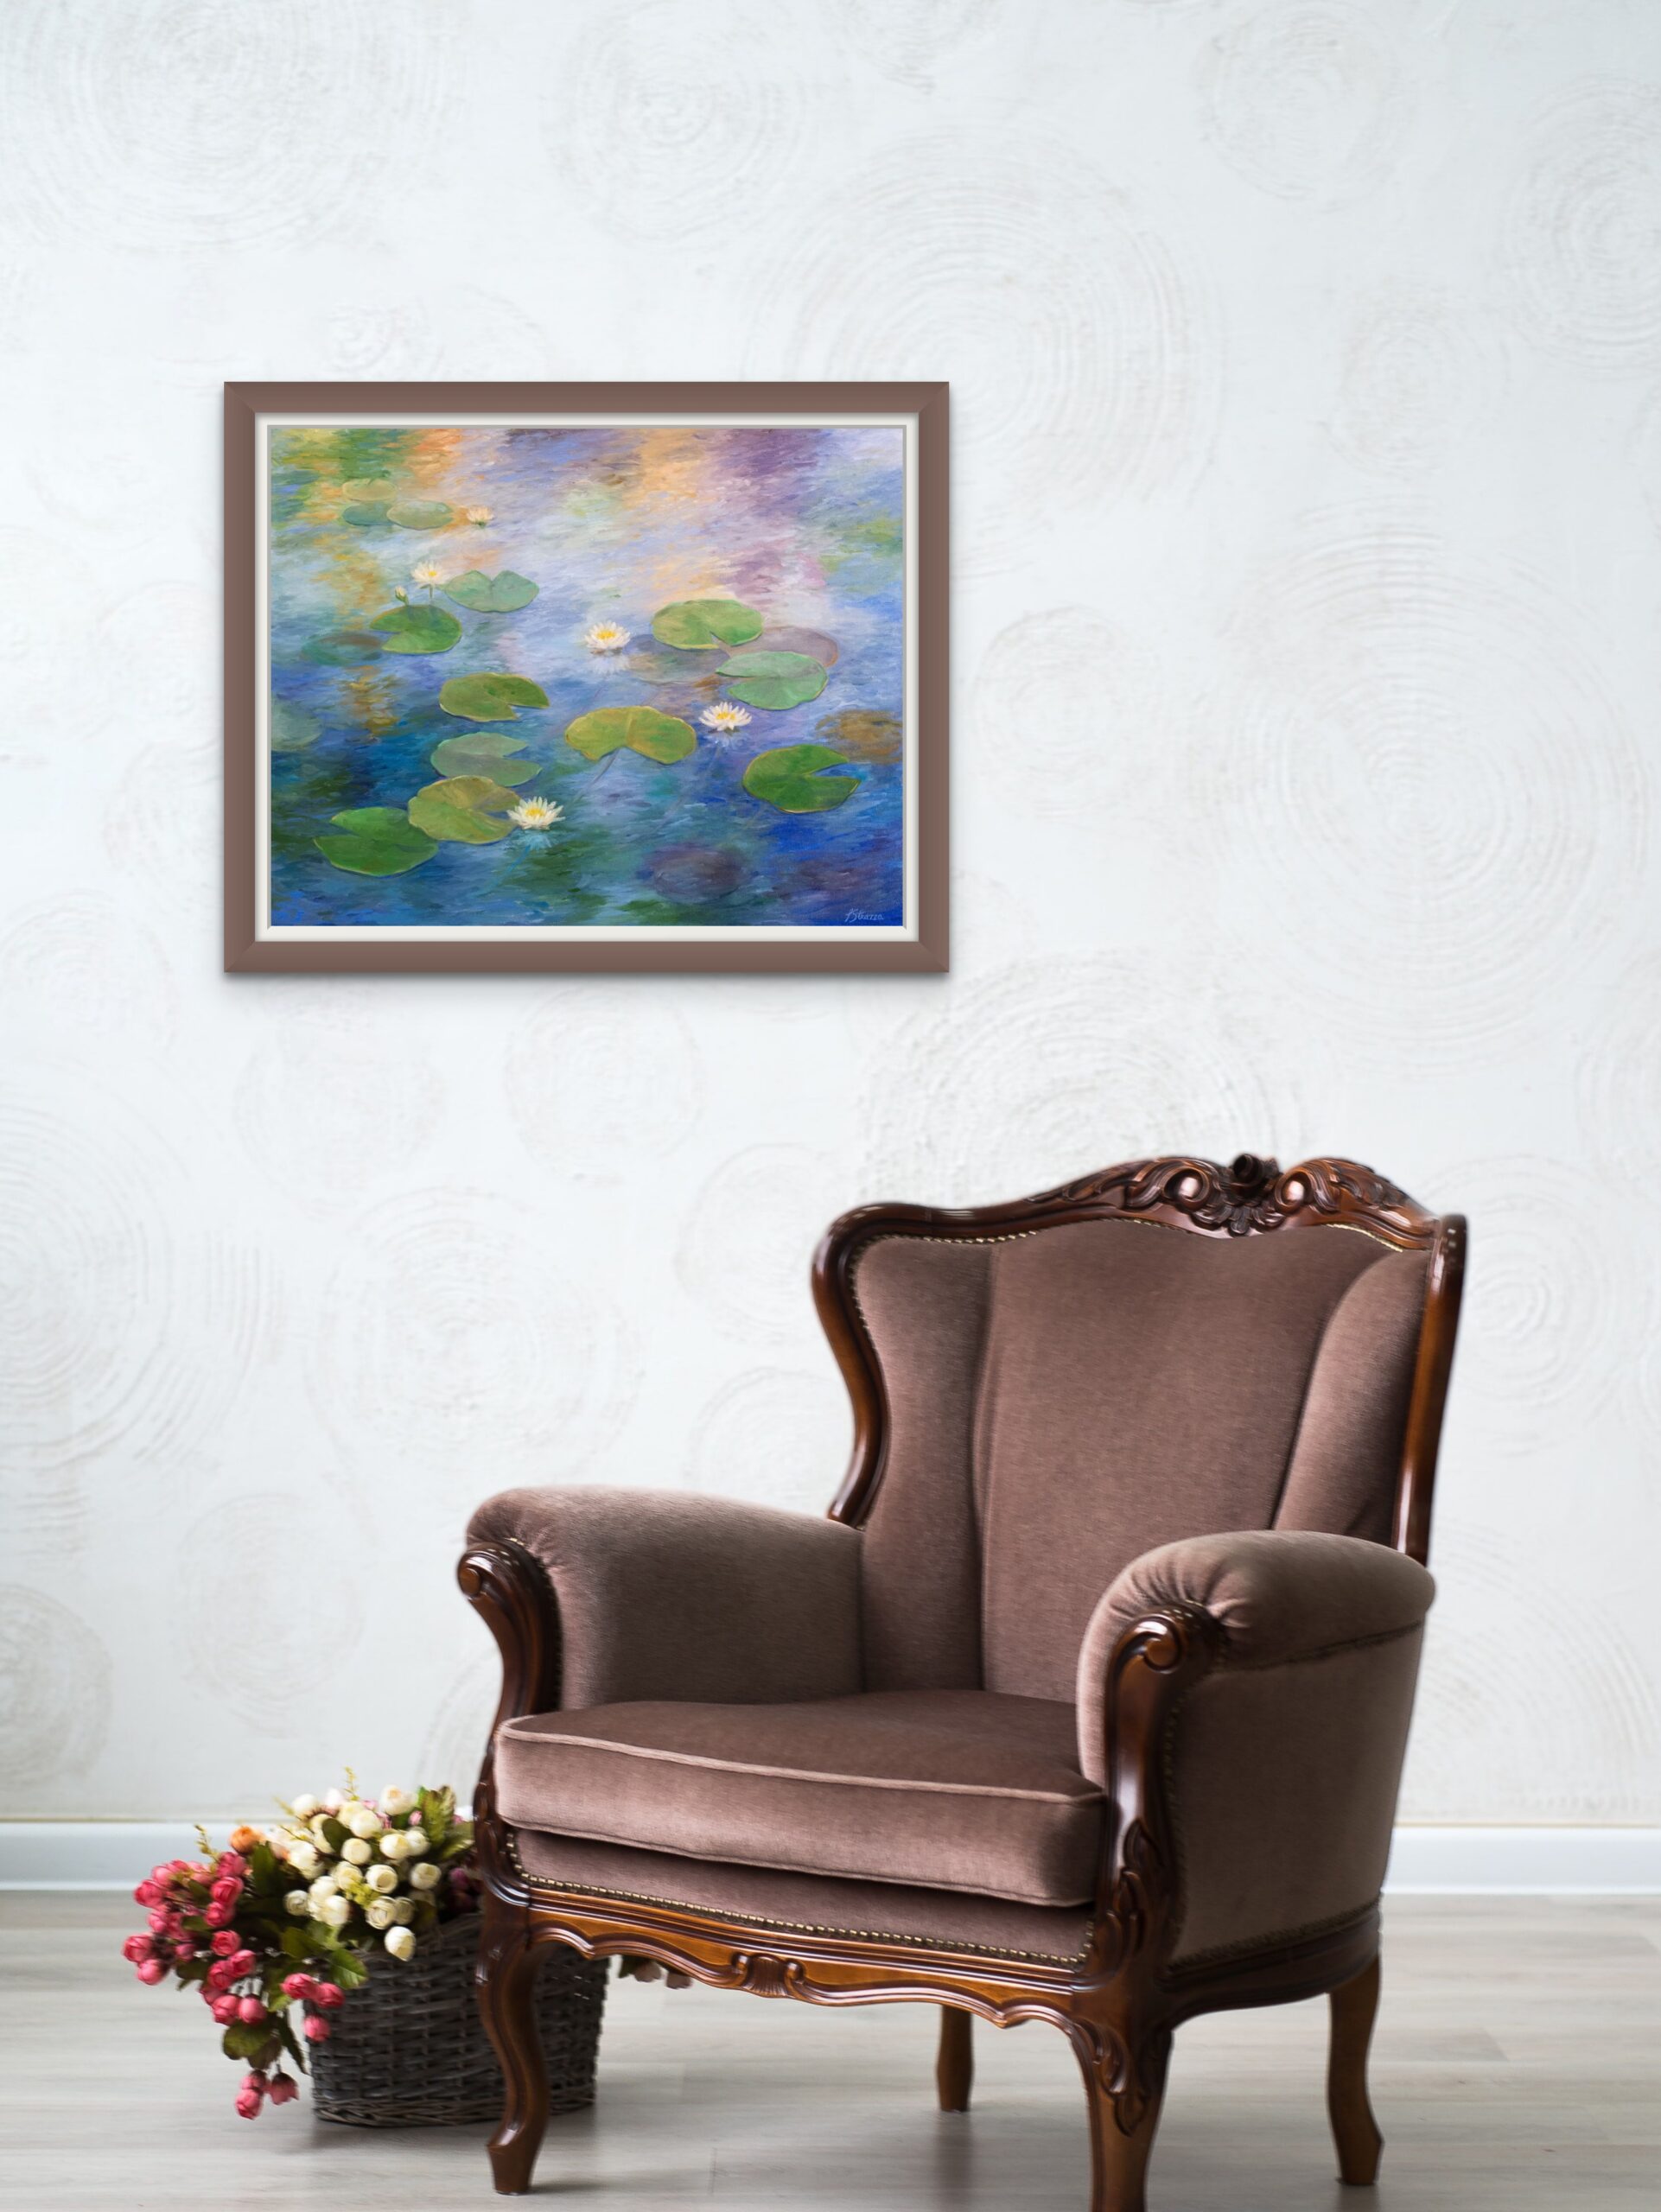 Peaceable Lilly Pond original oil painting by Lisa Strazza